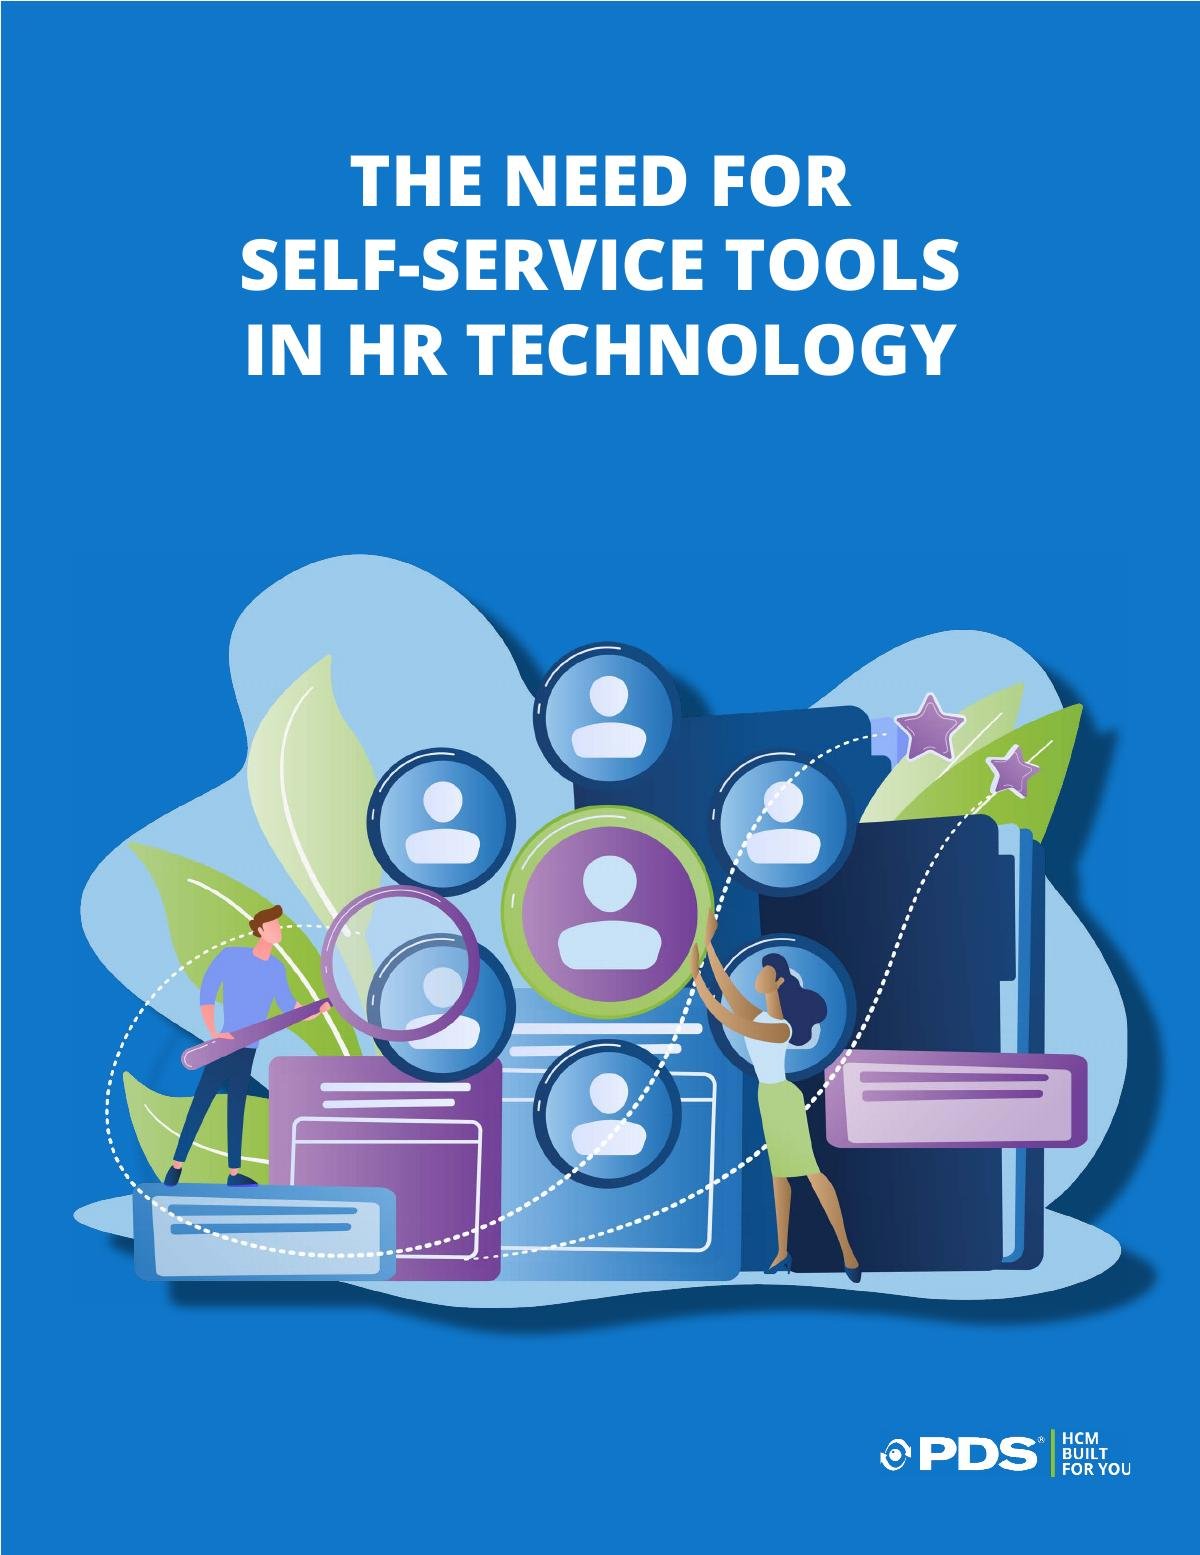 The Need for Self-Service Tools in HR Technology